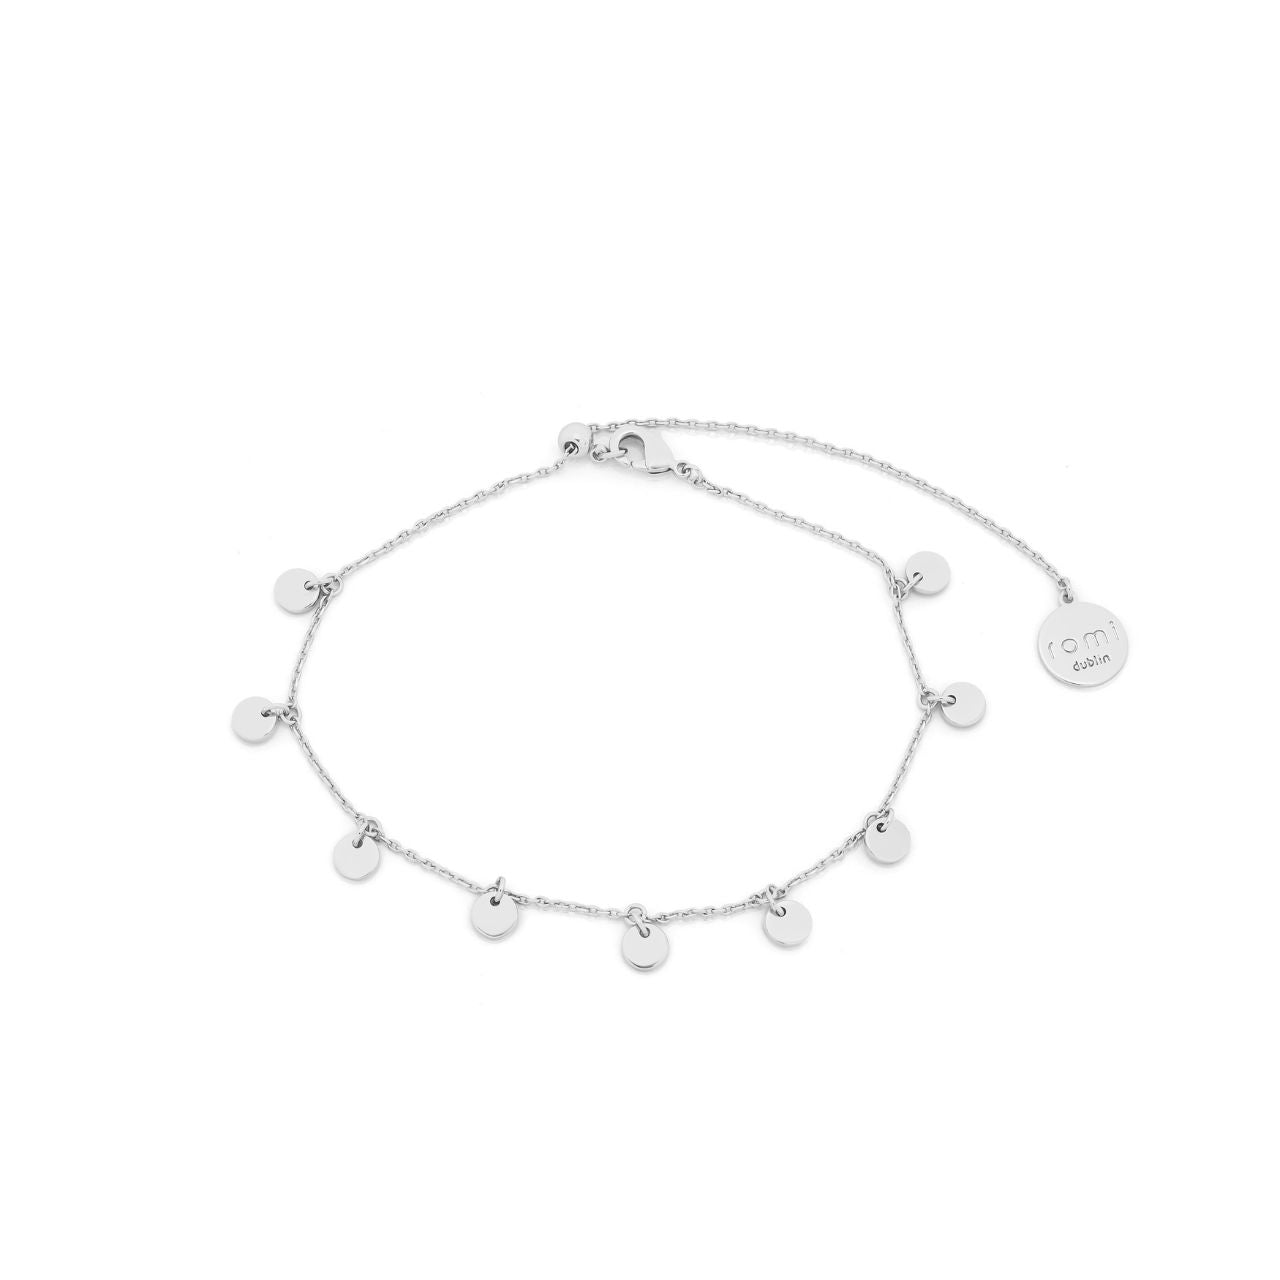 Romi Dublin Disc Chain Bracelet Silver  This easy-to-wear jewellery collection was inspired by daughter Romi who loves to style and accessorise. An outfit isn’t complete until the perfect pieces of jewellery and accessories have been selected to enhance it.